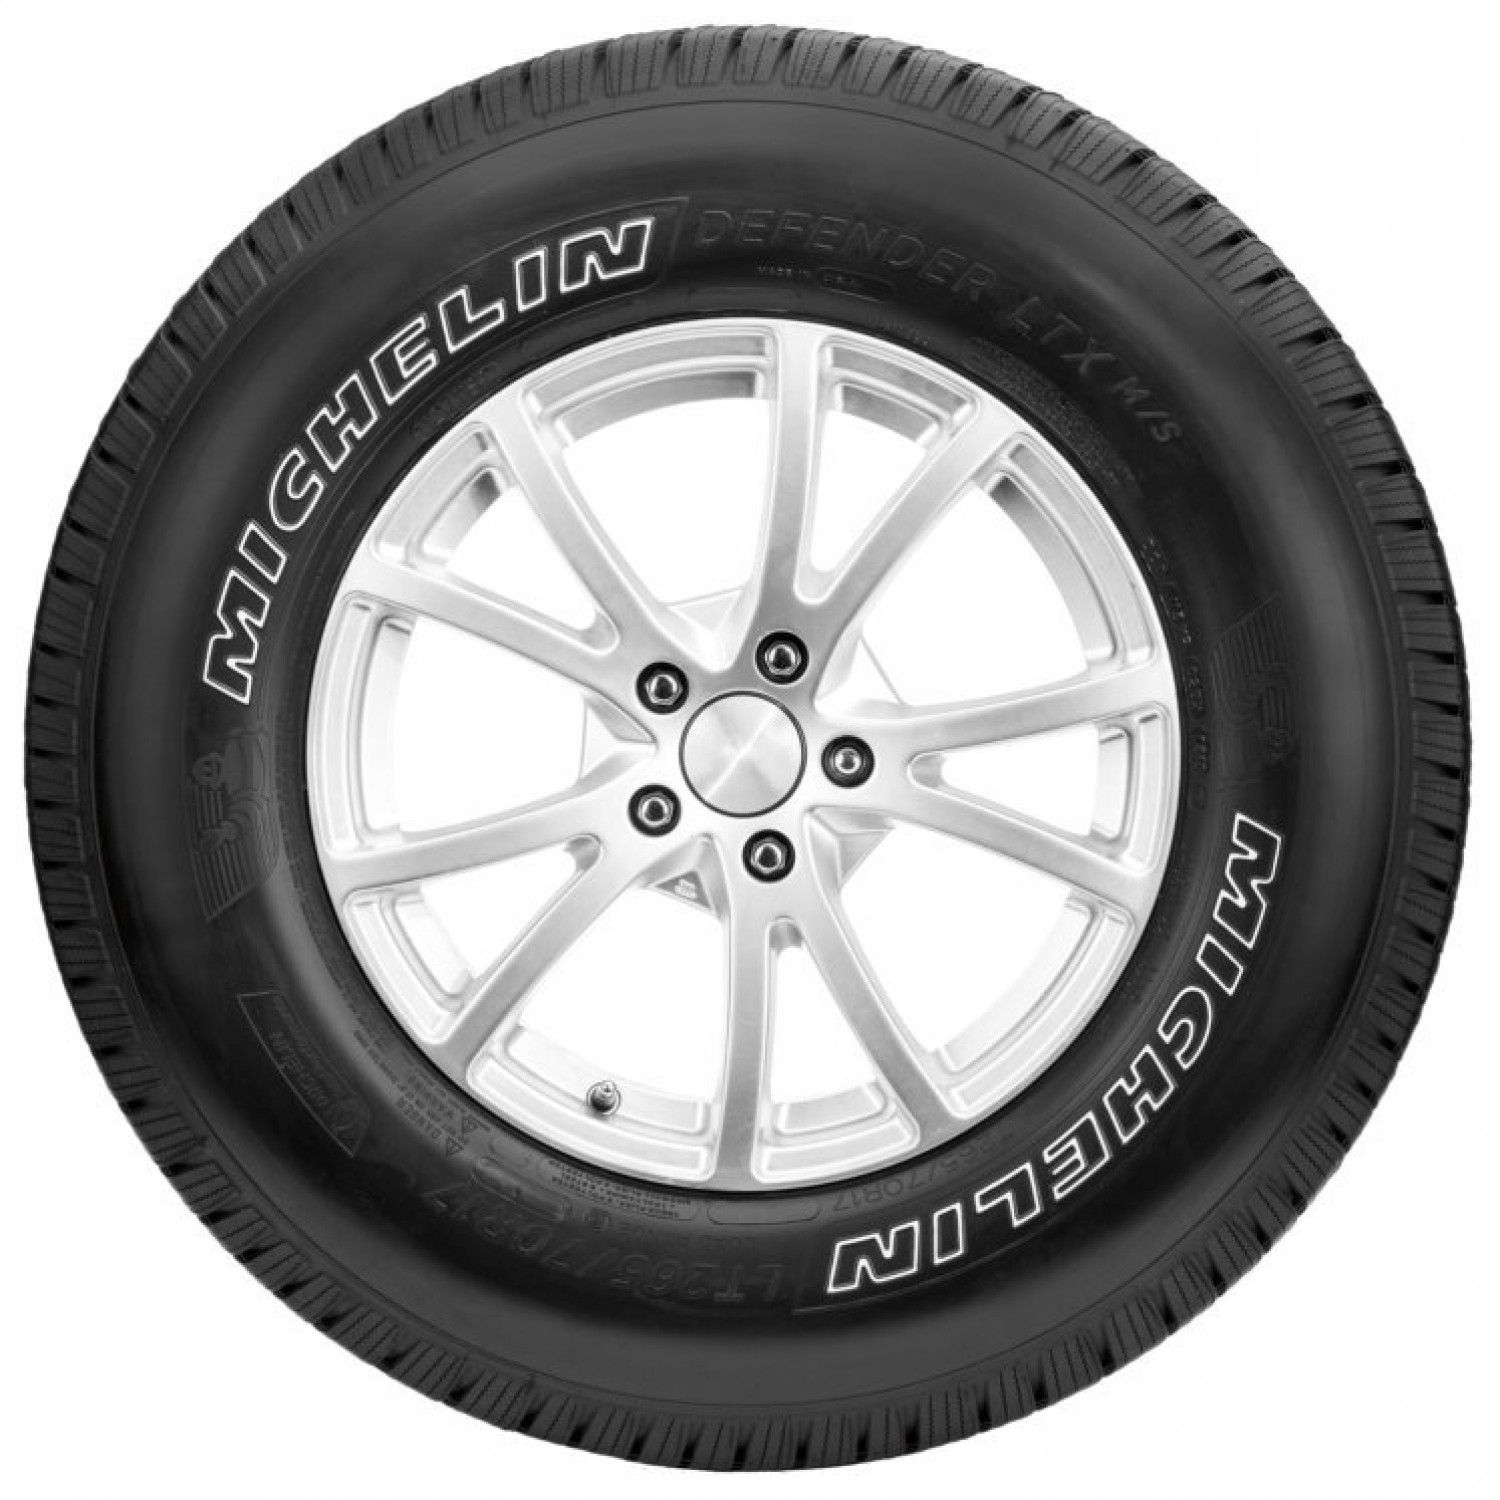 Michelin Defender LTX MS Outlined Raised White Letters Tire 235 75R15 